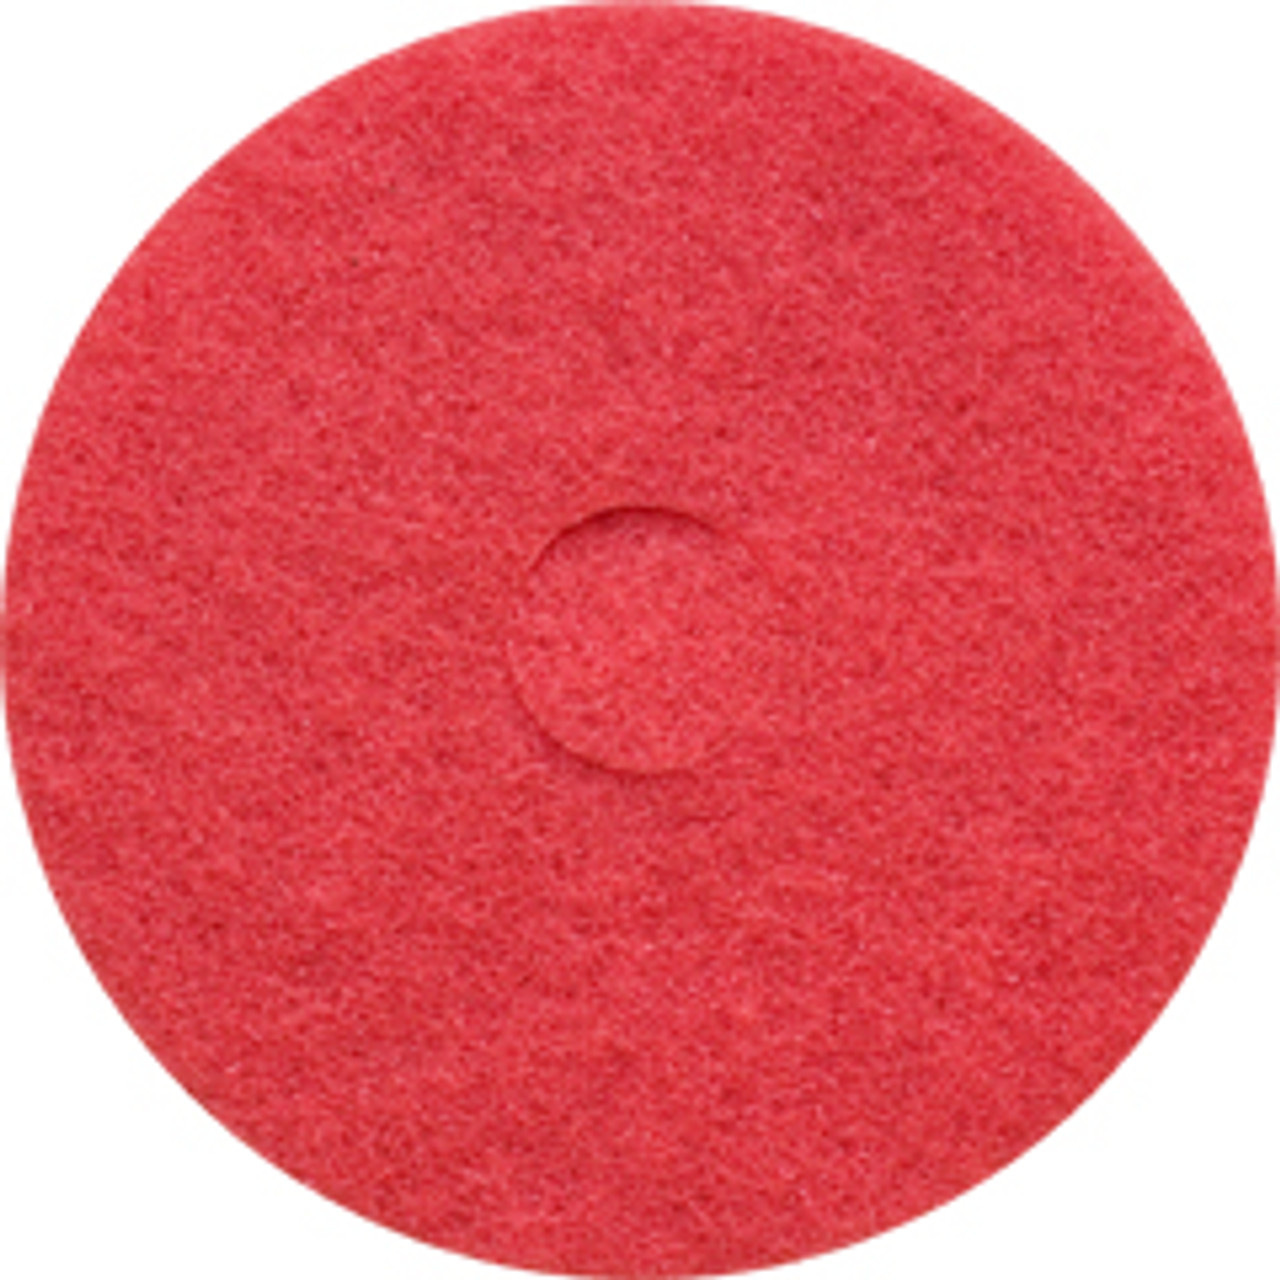 Oreck Orbiter Floor Pads 4370555 Red Clean And Buff 12 Inch